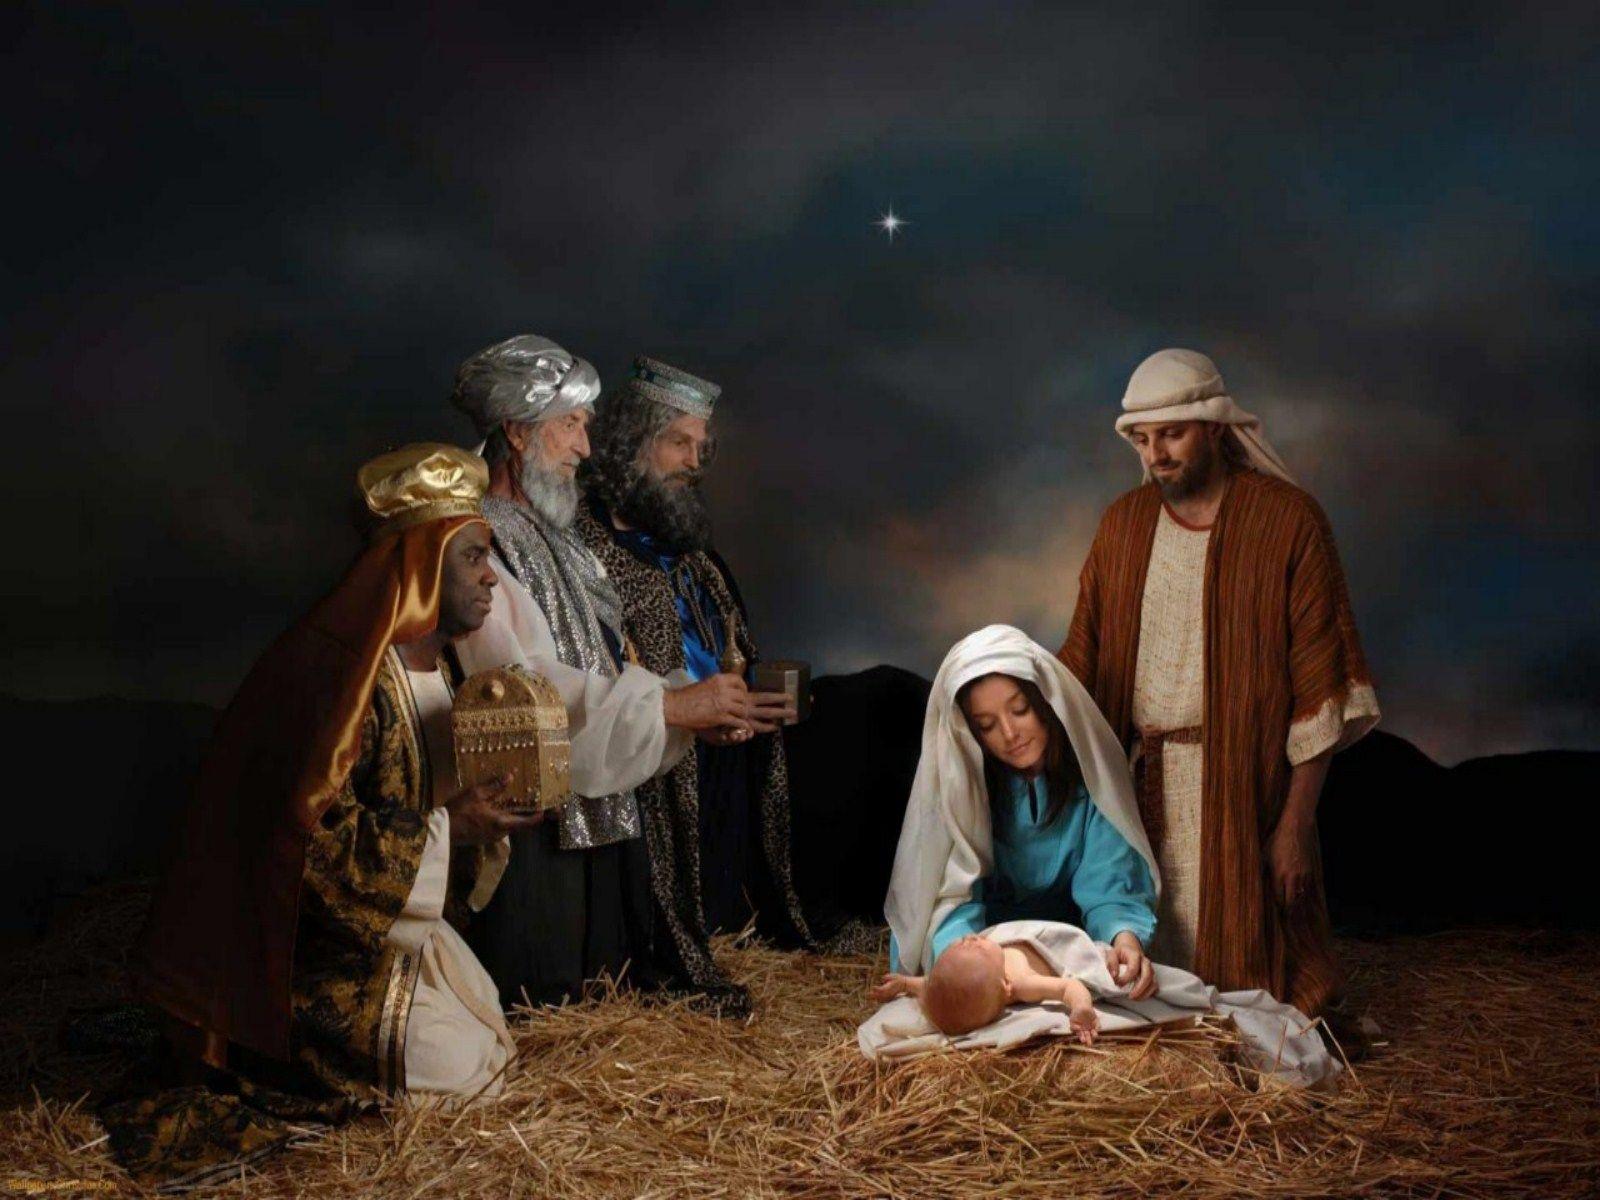 Wallpaper For > Nativity Background For Powerpoint